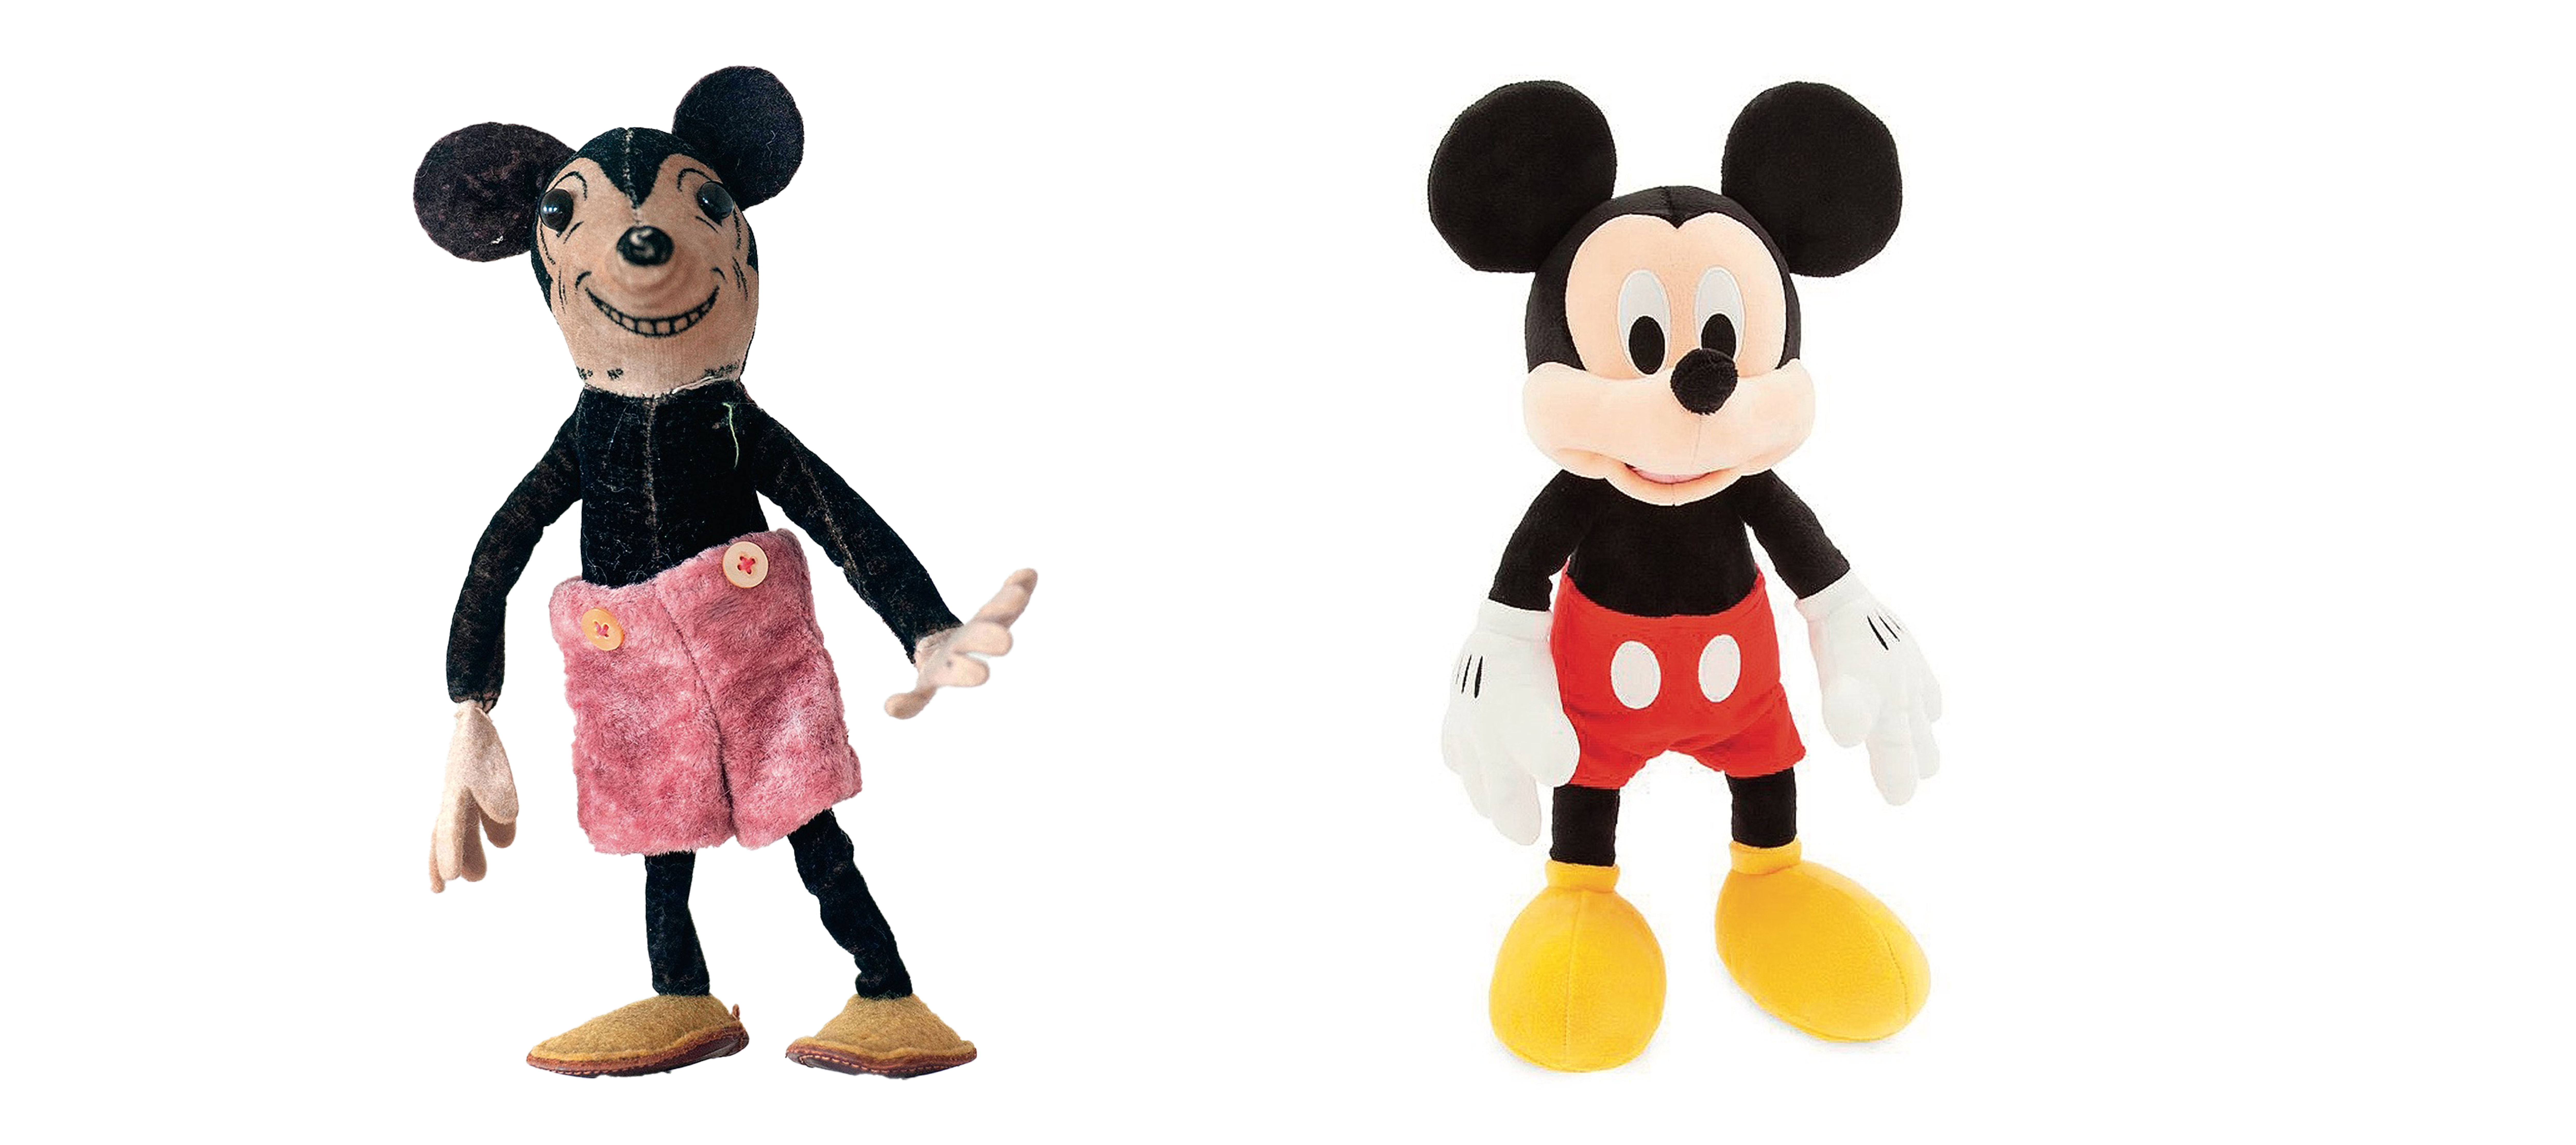 Old Mickey and young Mickey